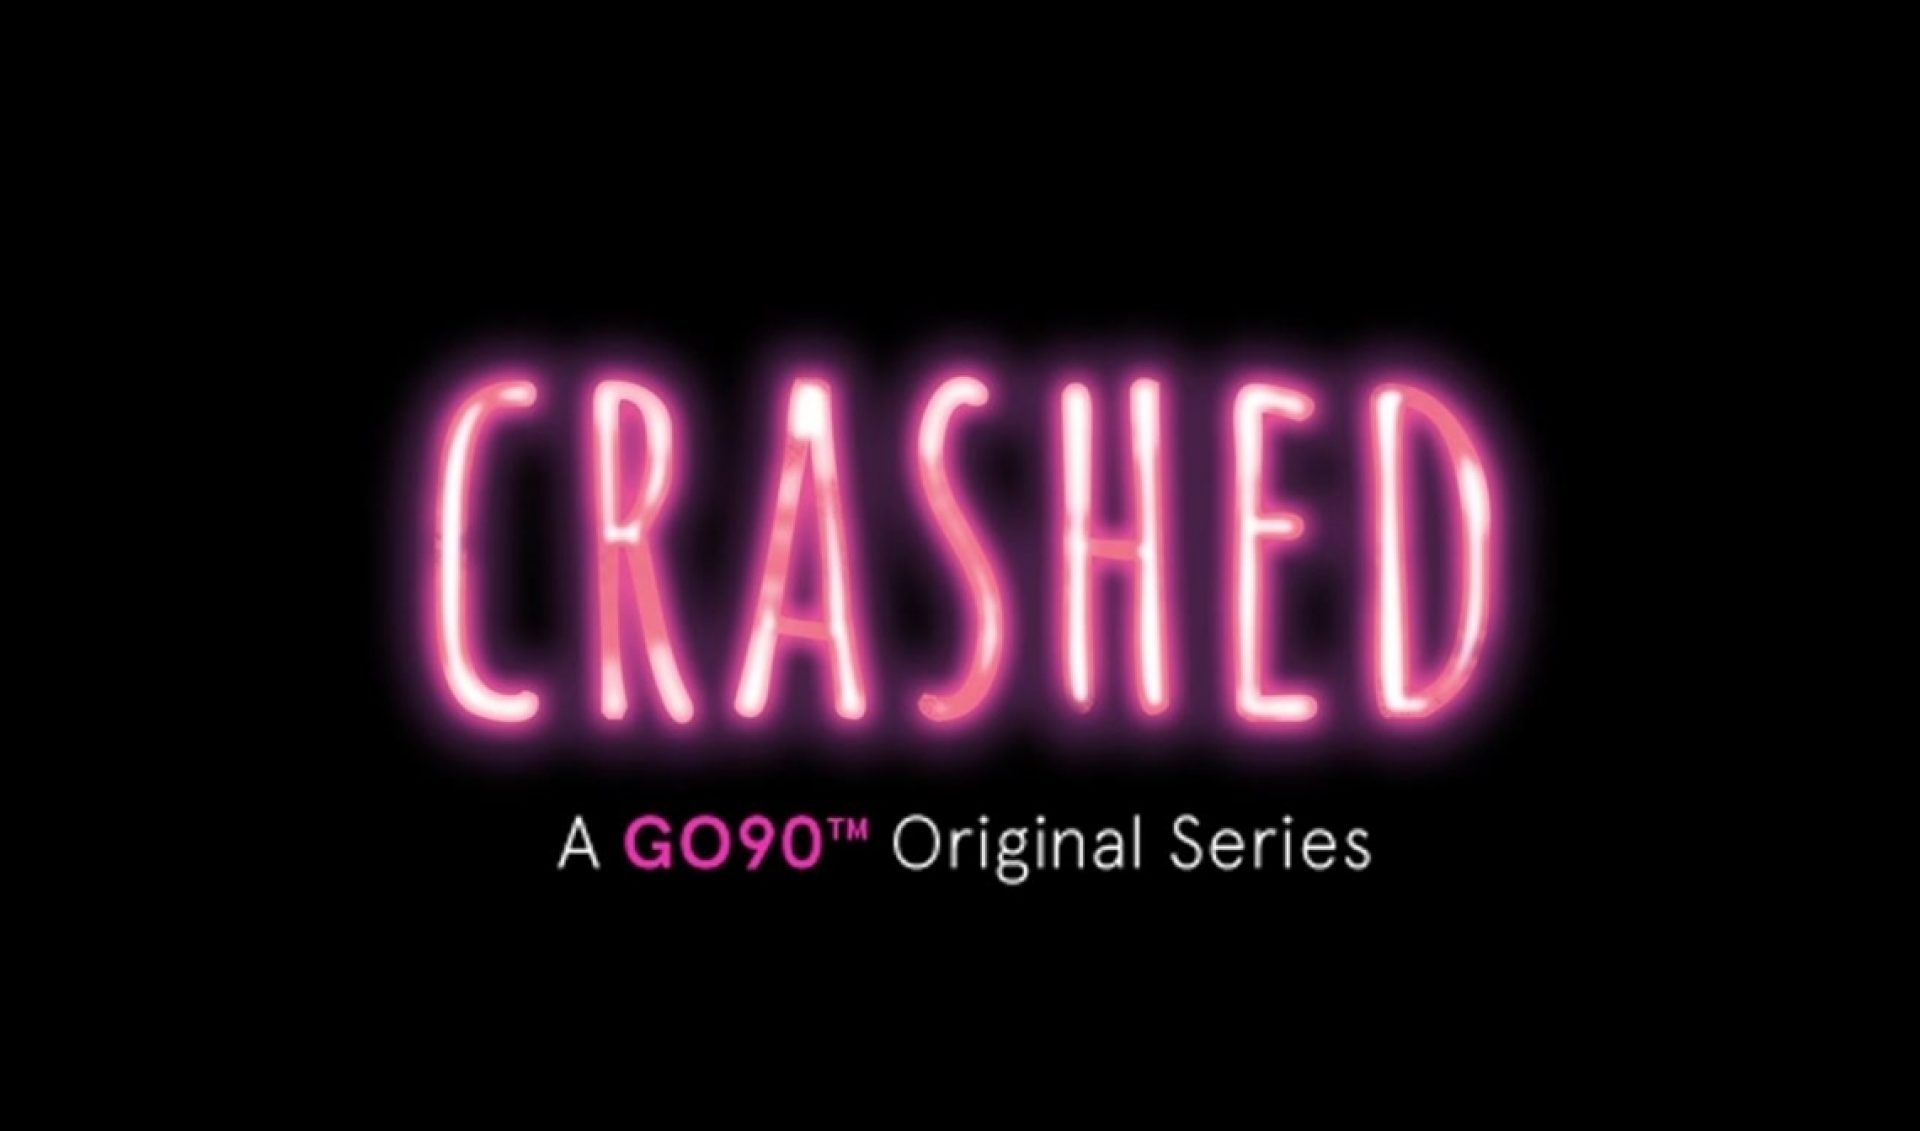 Joey Graceffa, Ricky Dillon To Feature In Joel McHale-Produced Go90 Series ‘Crashed’